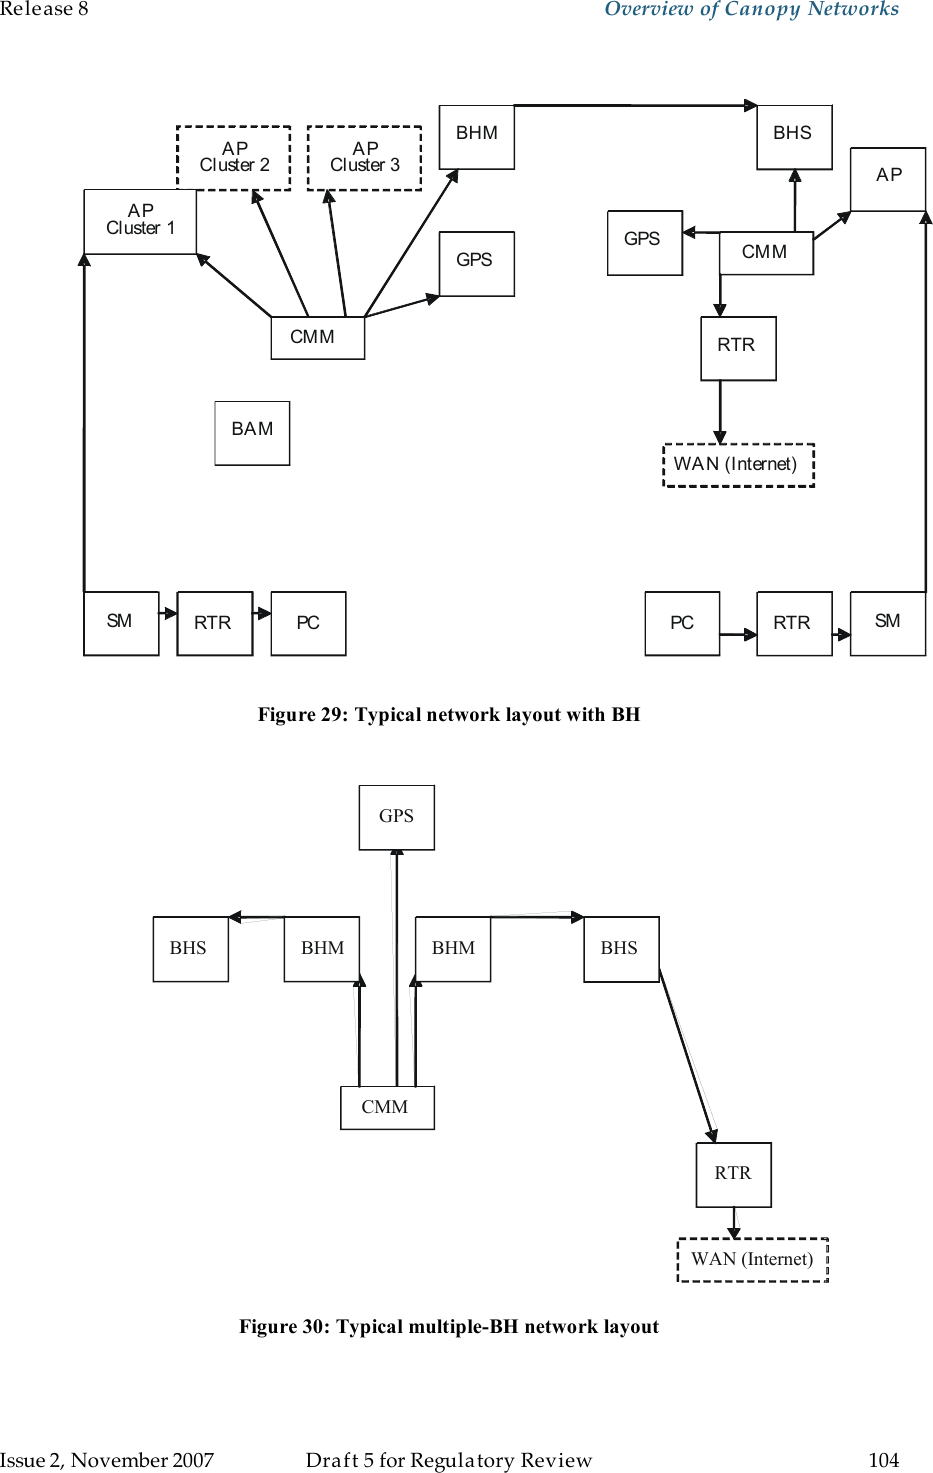 Release 8    Overview of Canopy Networks                  March 200                  Through Software Release 6.   Issue 2, November 2007  Draft 5 for Regulatory Review  104      Figure 29: Typical network layout with BH  BHSRTRWAN (Internet)CMMGPSBHM BHM BHS Figure 30: Typical multiple-BH network layout  P C R T R S M B H S B H M C M M G P S B A M A P C l u s t e r 2 A P C l u s t e r 1 A P C l u s t e r 3 C M M R T R A P S M R T R P C W A N ( I n t e r n e t ) G P S 